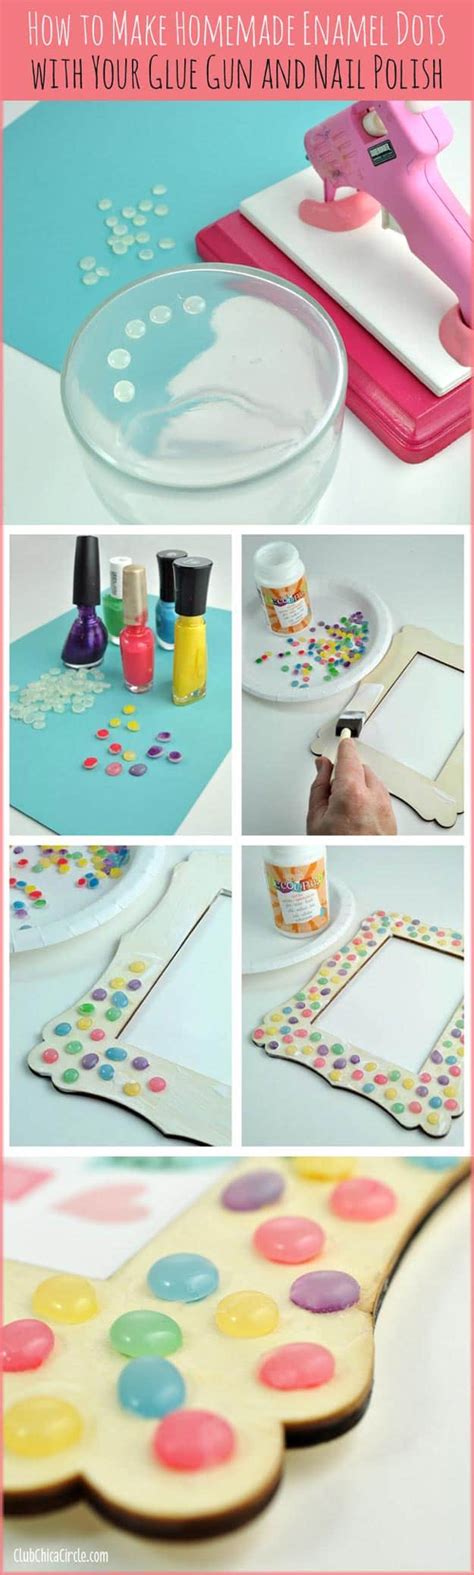 Keeping It Simple 15 Awesome Crafts Made With Hot Glue